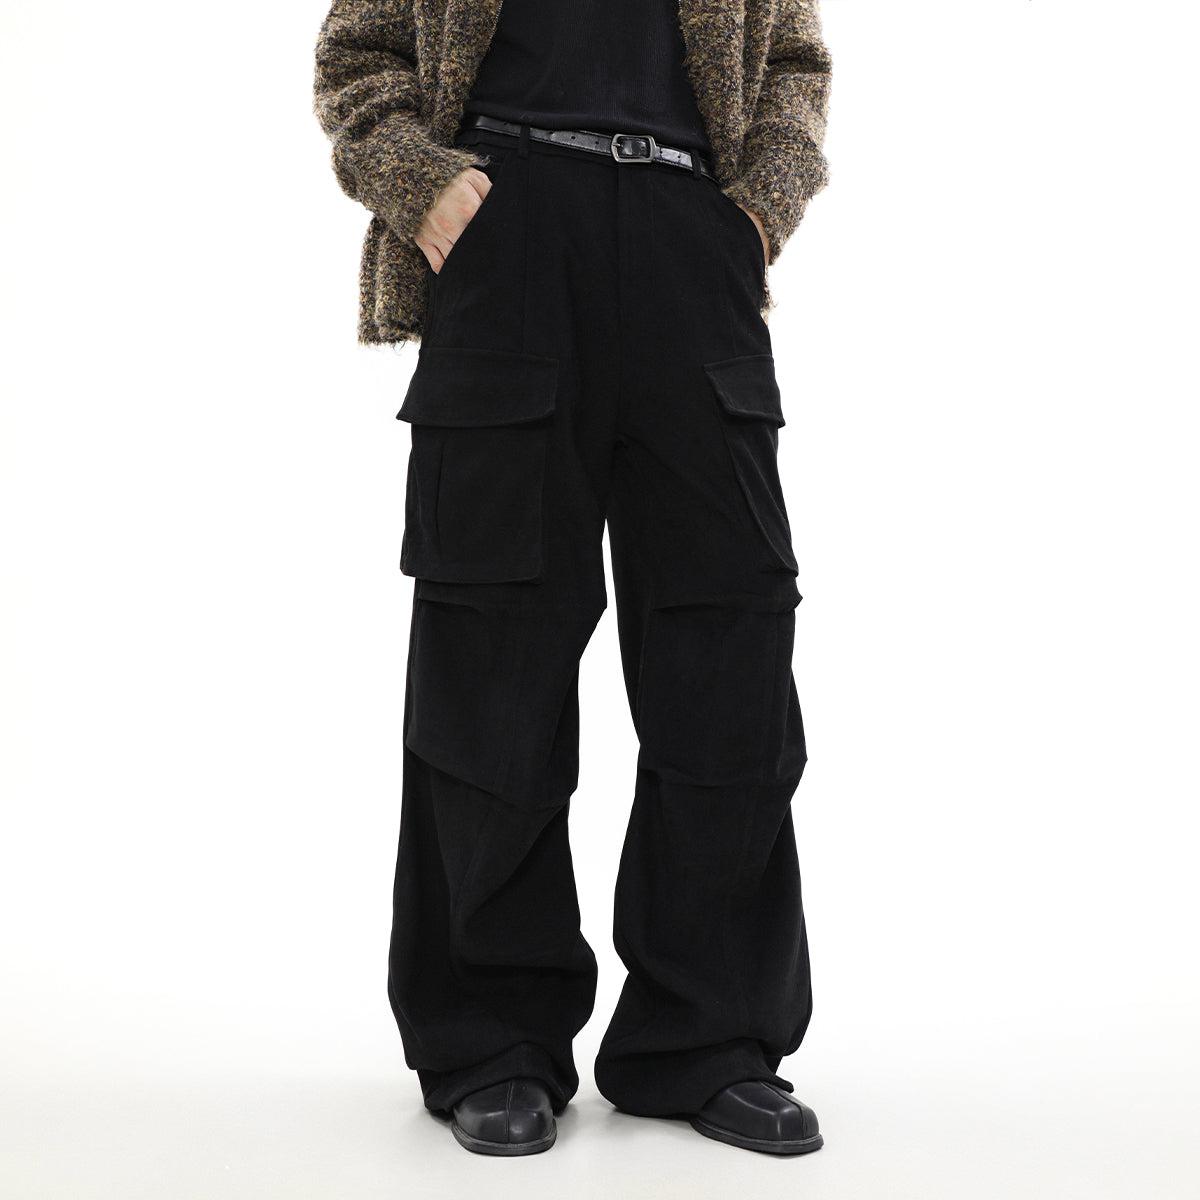 Knee Pleated Wide Cut Cargo Pants Korean Street Fashion Pants By Mr Nearly Shop Online at OH Vault